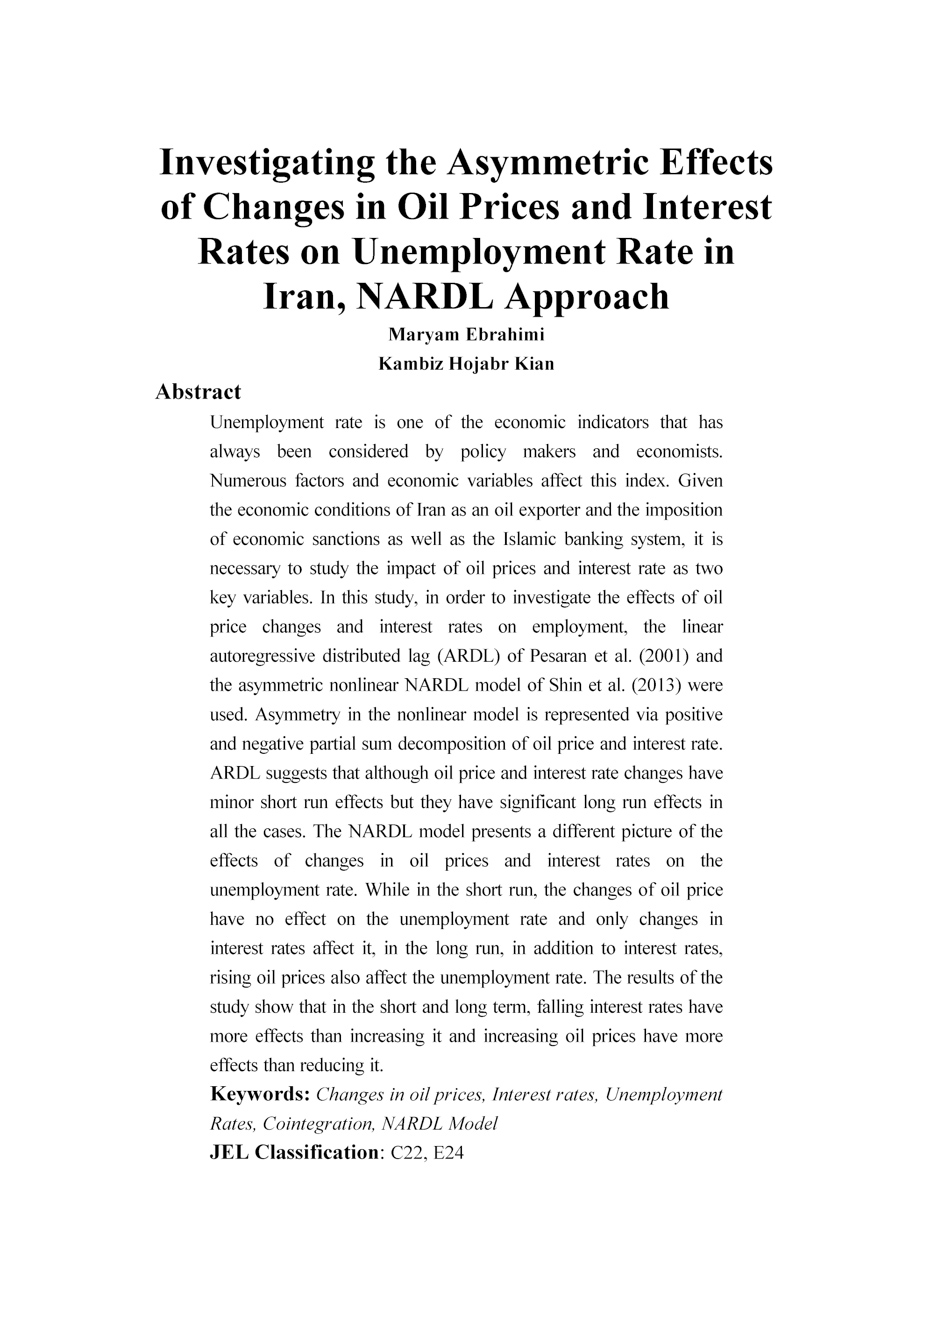 Investigating the Asymmetric Effects of Changes in Oil Prices and Interest Rates on Unemployment Rate in Iran NARDL Approach